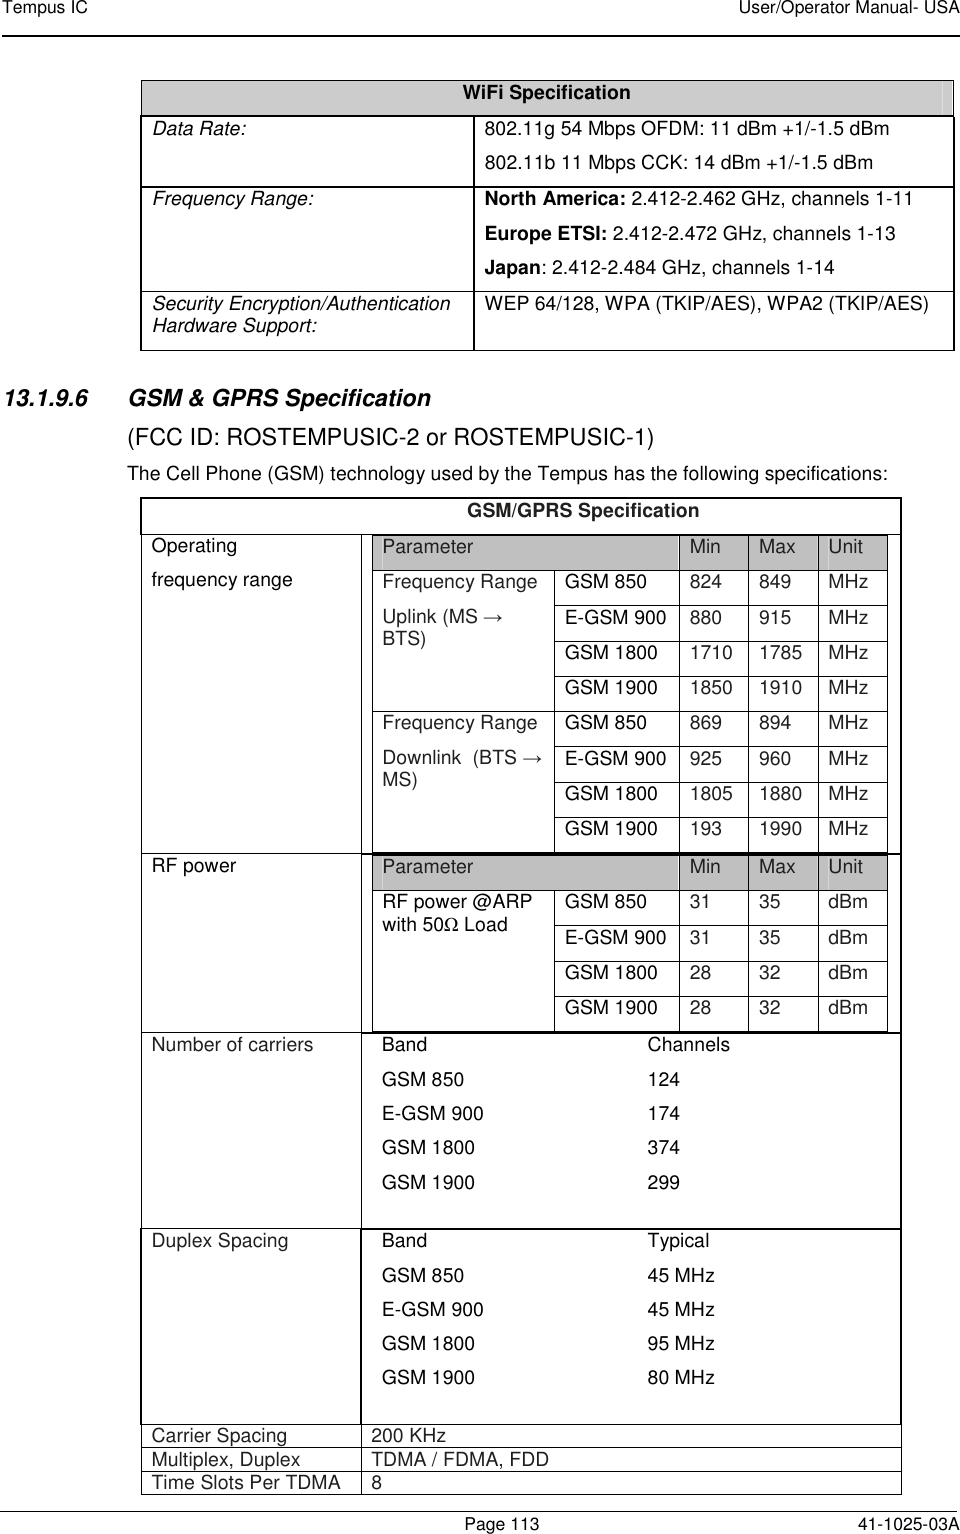 Tempus IC    User/Operator Manual- USA        Page 113   41-1025-03A WiFi Specification Data Rate:   802.11g 54 Mbps OFDM: 11 dBm +1/-1.5 dBm 802.11b 11 Mbps CCK: 14 dBm +1/-1.5 dBm Frequency Range:  North America: 2.412-2.462 GHz, channels 1-11  Europe ETSI: 2.412-2.472 GHz, channels 1-13  Japan: 2.412-2.484 GHz, channels 1-14  Security Encryption/Authentication Hardware Support:  WEP 64/128, WPA (TKIP/AES), WPA2 (TKIP/AES)  13.1.9.6  GSM &amp; GPRS Specification (FCC ID: ROSTEMPUSIC-2 or ROSTEMPUSIC-1) The Cell Phone (GSM) technology used by the Tempus has the following specifications: GSM/GPRS Specification Operating frequency range  Parameter  Min  Max  Unit Frequency Range  Uplink (MS → BTS) GSM 850  824  849  MHz E-GSM 900  880  915  MHz GSM 1800  1710  1785  MHz GSM 1900  1850  1910  MHz Frequency Range  Downlink  (BTS → MS) GSM 850  869  894  MHz E-GSM 900  925  960  MHz GSM 1800  1805  1880  MHz GSM 1900  193  1990  MHz  RF power   Parameter  Min  Max  Unit RF power @ARP with 50Ω Load GSM 850  31  35  dBm E-GSM 900  31  35  dBm GSM 1800  28  32  dBm GSM 1900  28  32  dBm  Number of carriers   Band  Channels  GSM 850  124 E-GSM 900   174 GSM 1800   374 GSM 1900  299  Duplex Spacing   Band  Typical  GSM 850  45 MHz E-GSM 900   45 MHz GSM 1800   95 MHz GSM 1900  80 MHz  Carrier Spacing   200 KHz Multiplex, Duplex   TDMA / FDMA, FDD Time Slots Per TDMA  8 